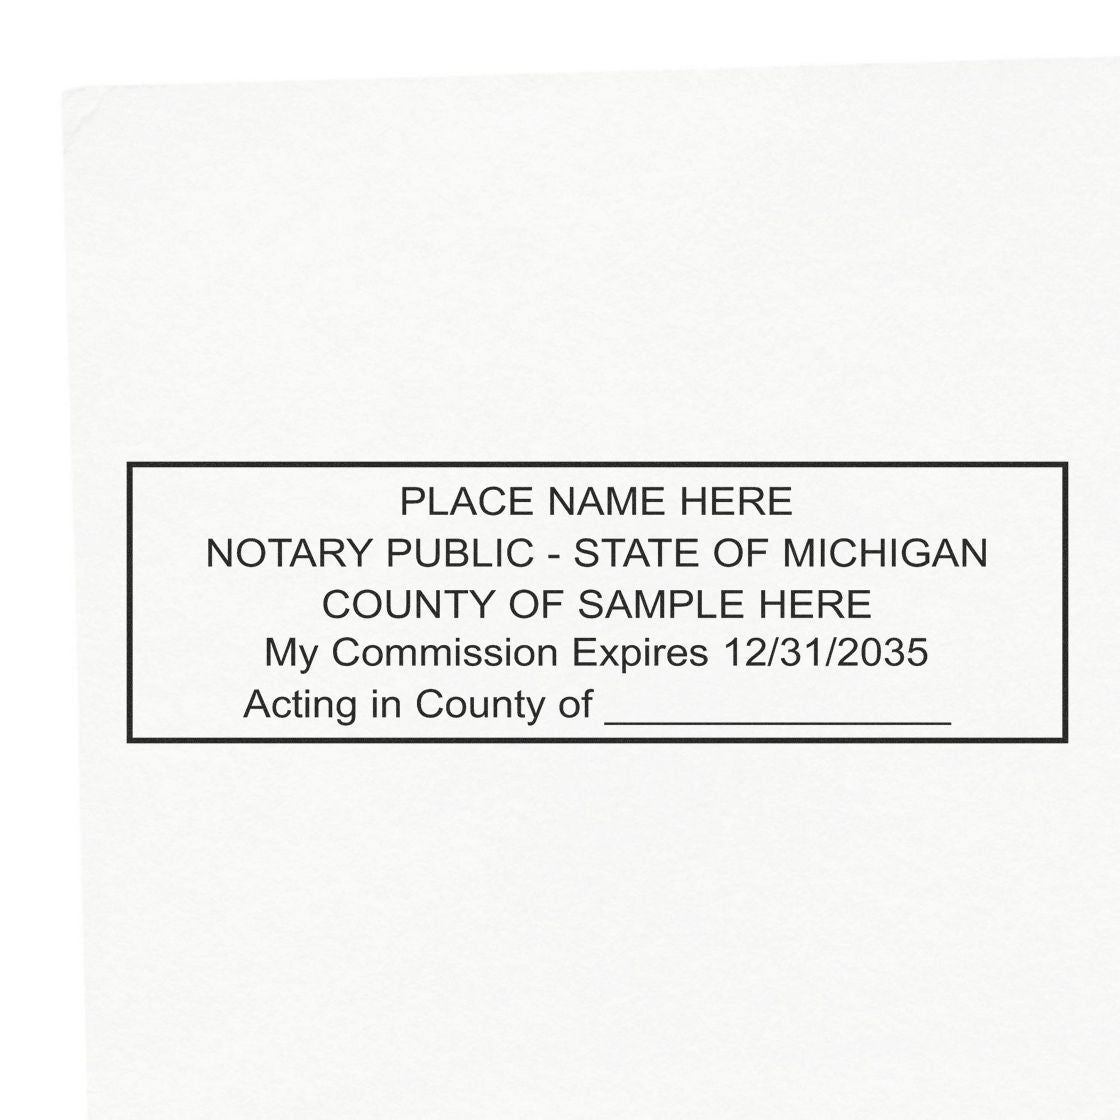 Another Example of a stamped impression of the Heavy-Duty Michigan Rectangular Notary Stamp on a piece of office paper.